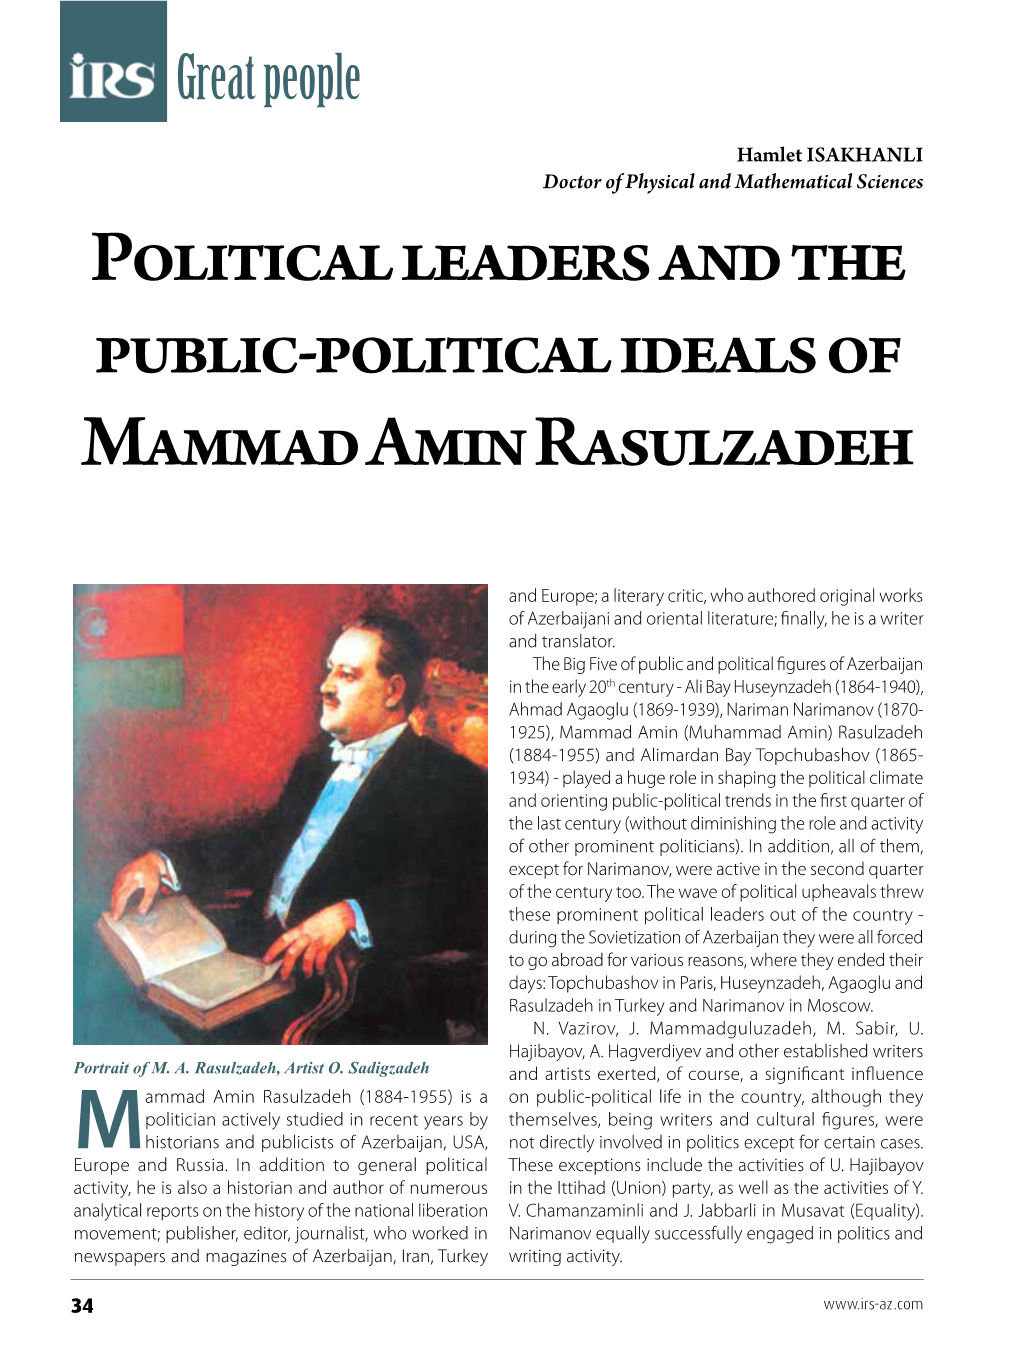 Political Leaders and the Public-Political Ideals of Mammad Amin Rasulzadeh